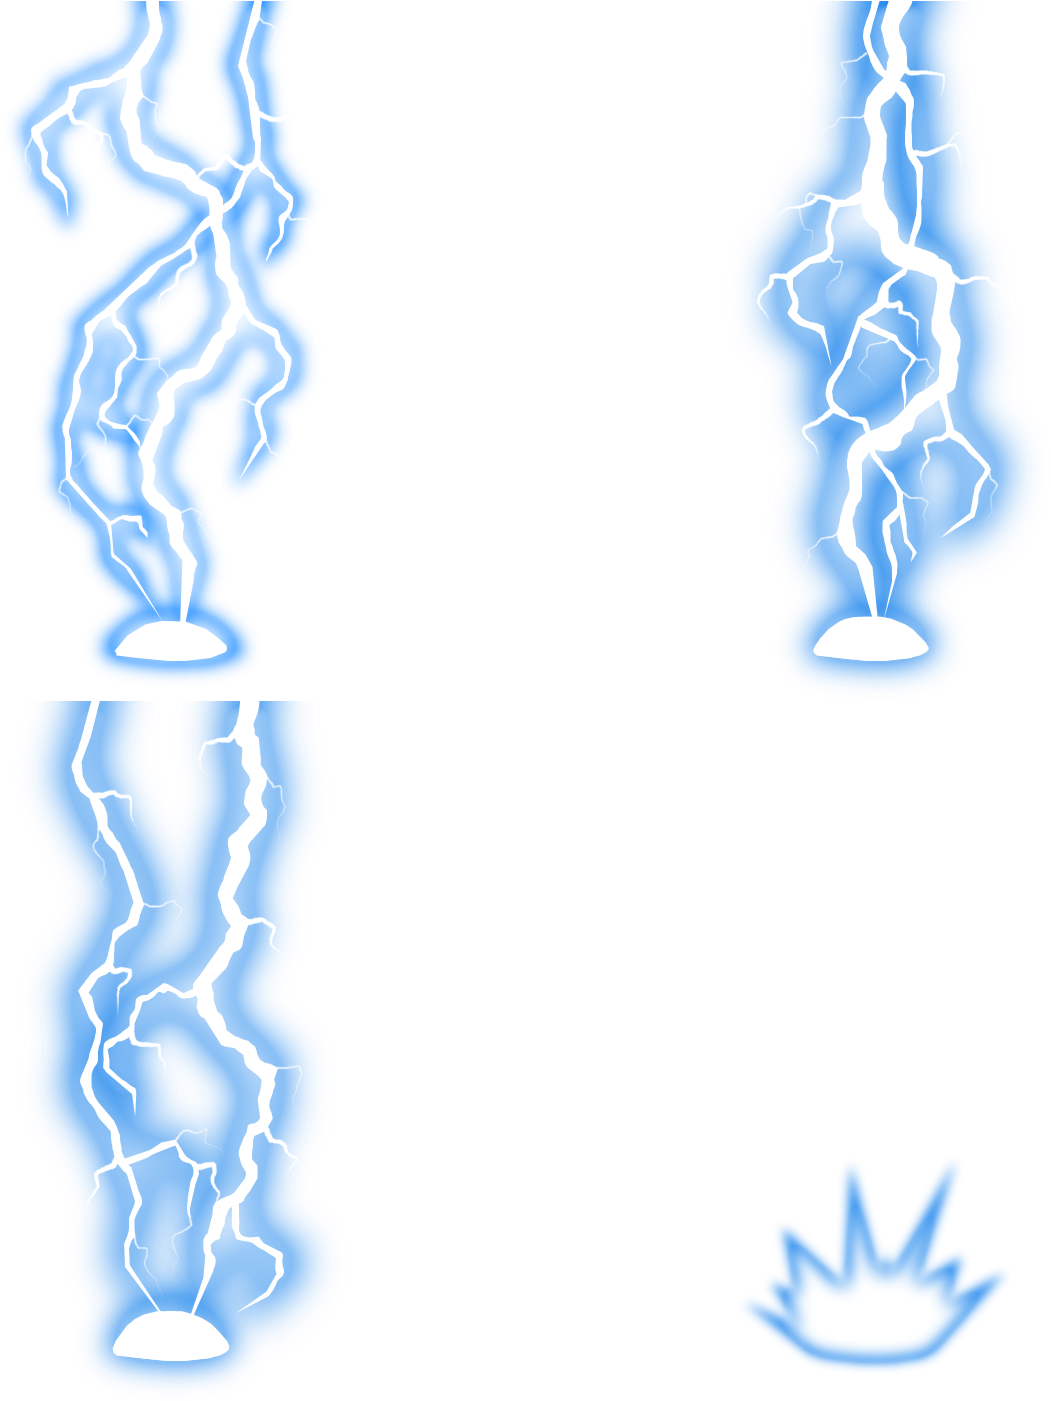 Blue Lightning Effects Graphic PNG image